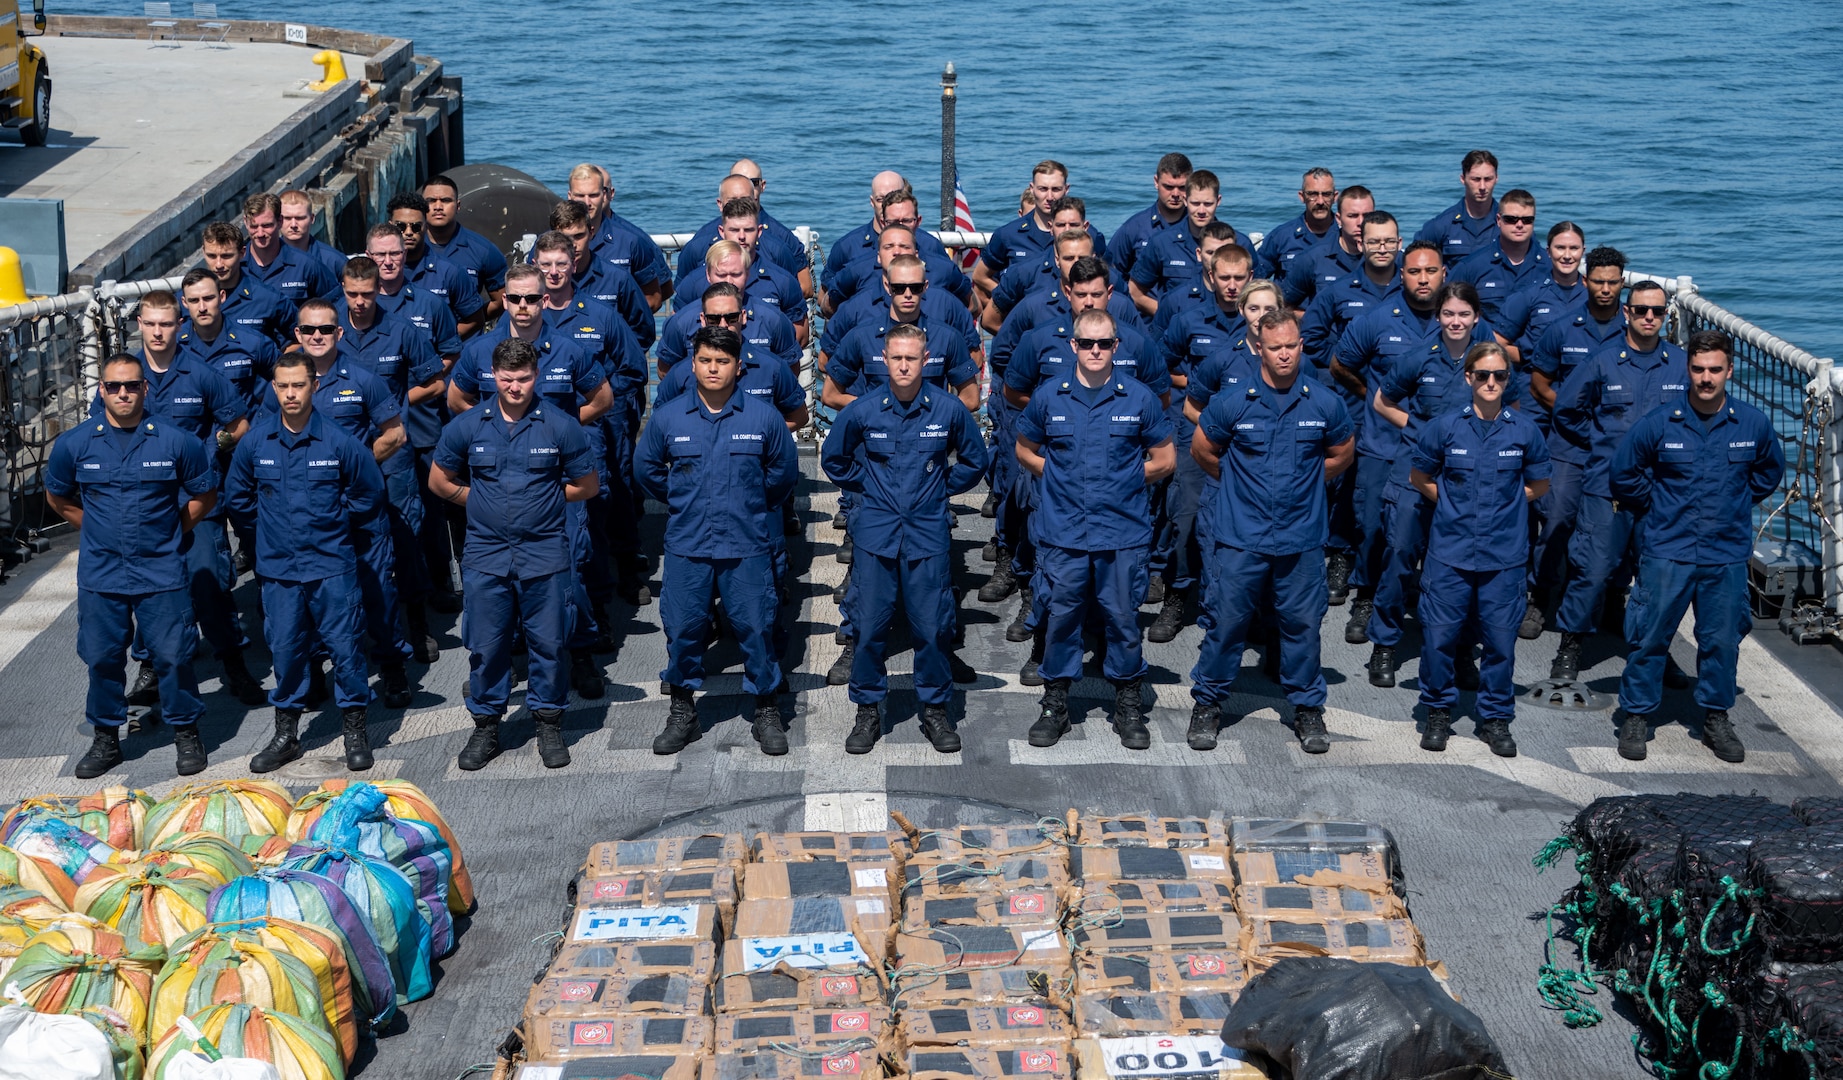 Coast Guard members stand at attention on the deck of the cutter.